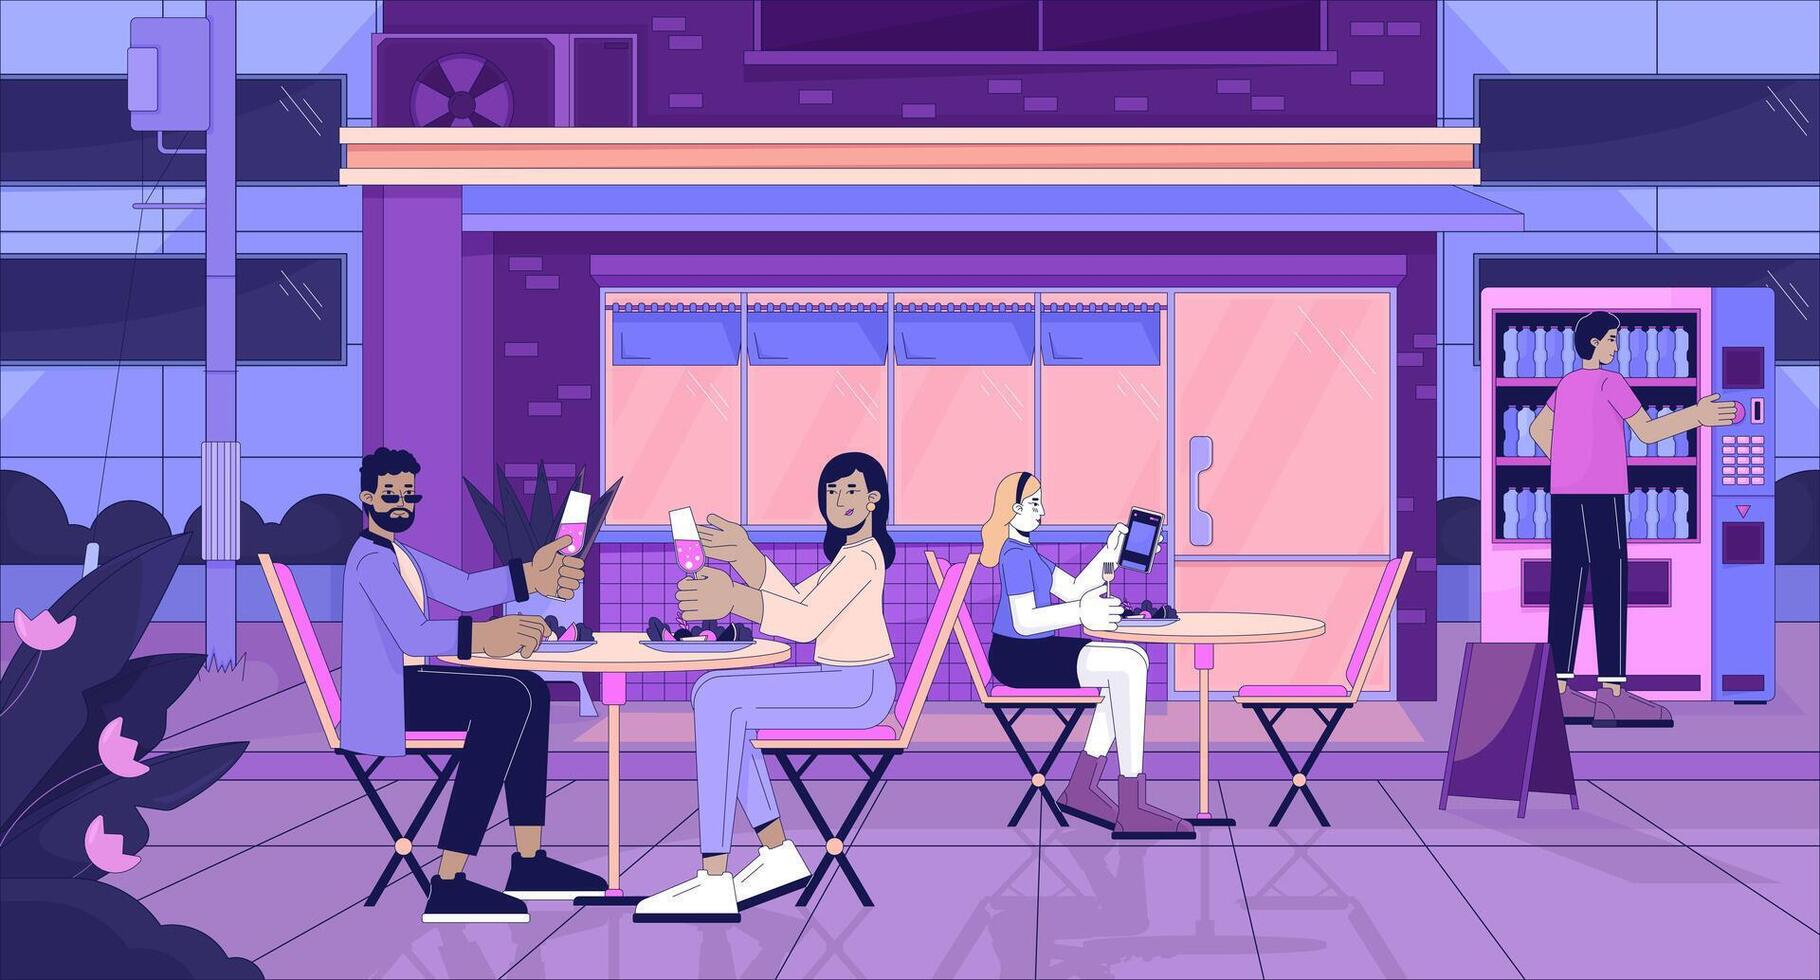 Sidewalk restaurant at evening line cartoon flat illustration. Dining couple, alone girl dinner 2D lineart cityscape background. Downtown cafe. Feel nostalgic. Lo fi vibes scene vector color image